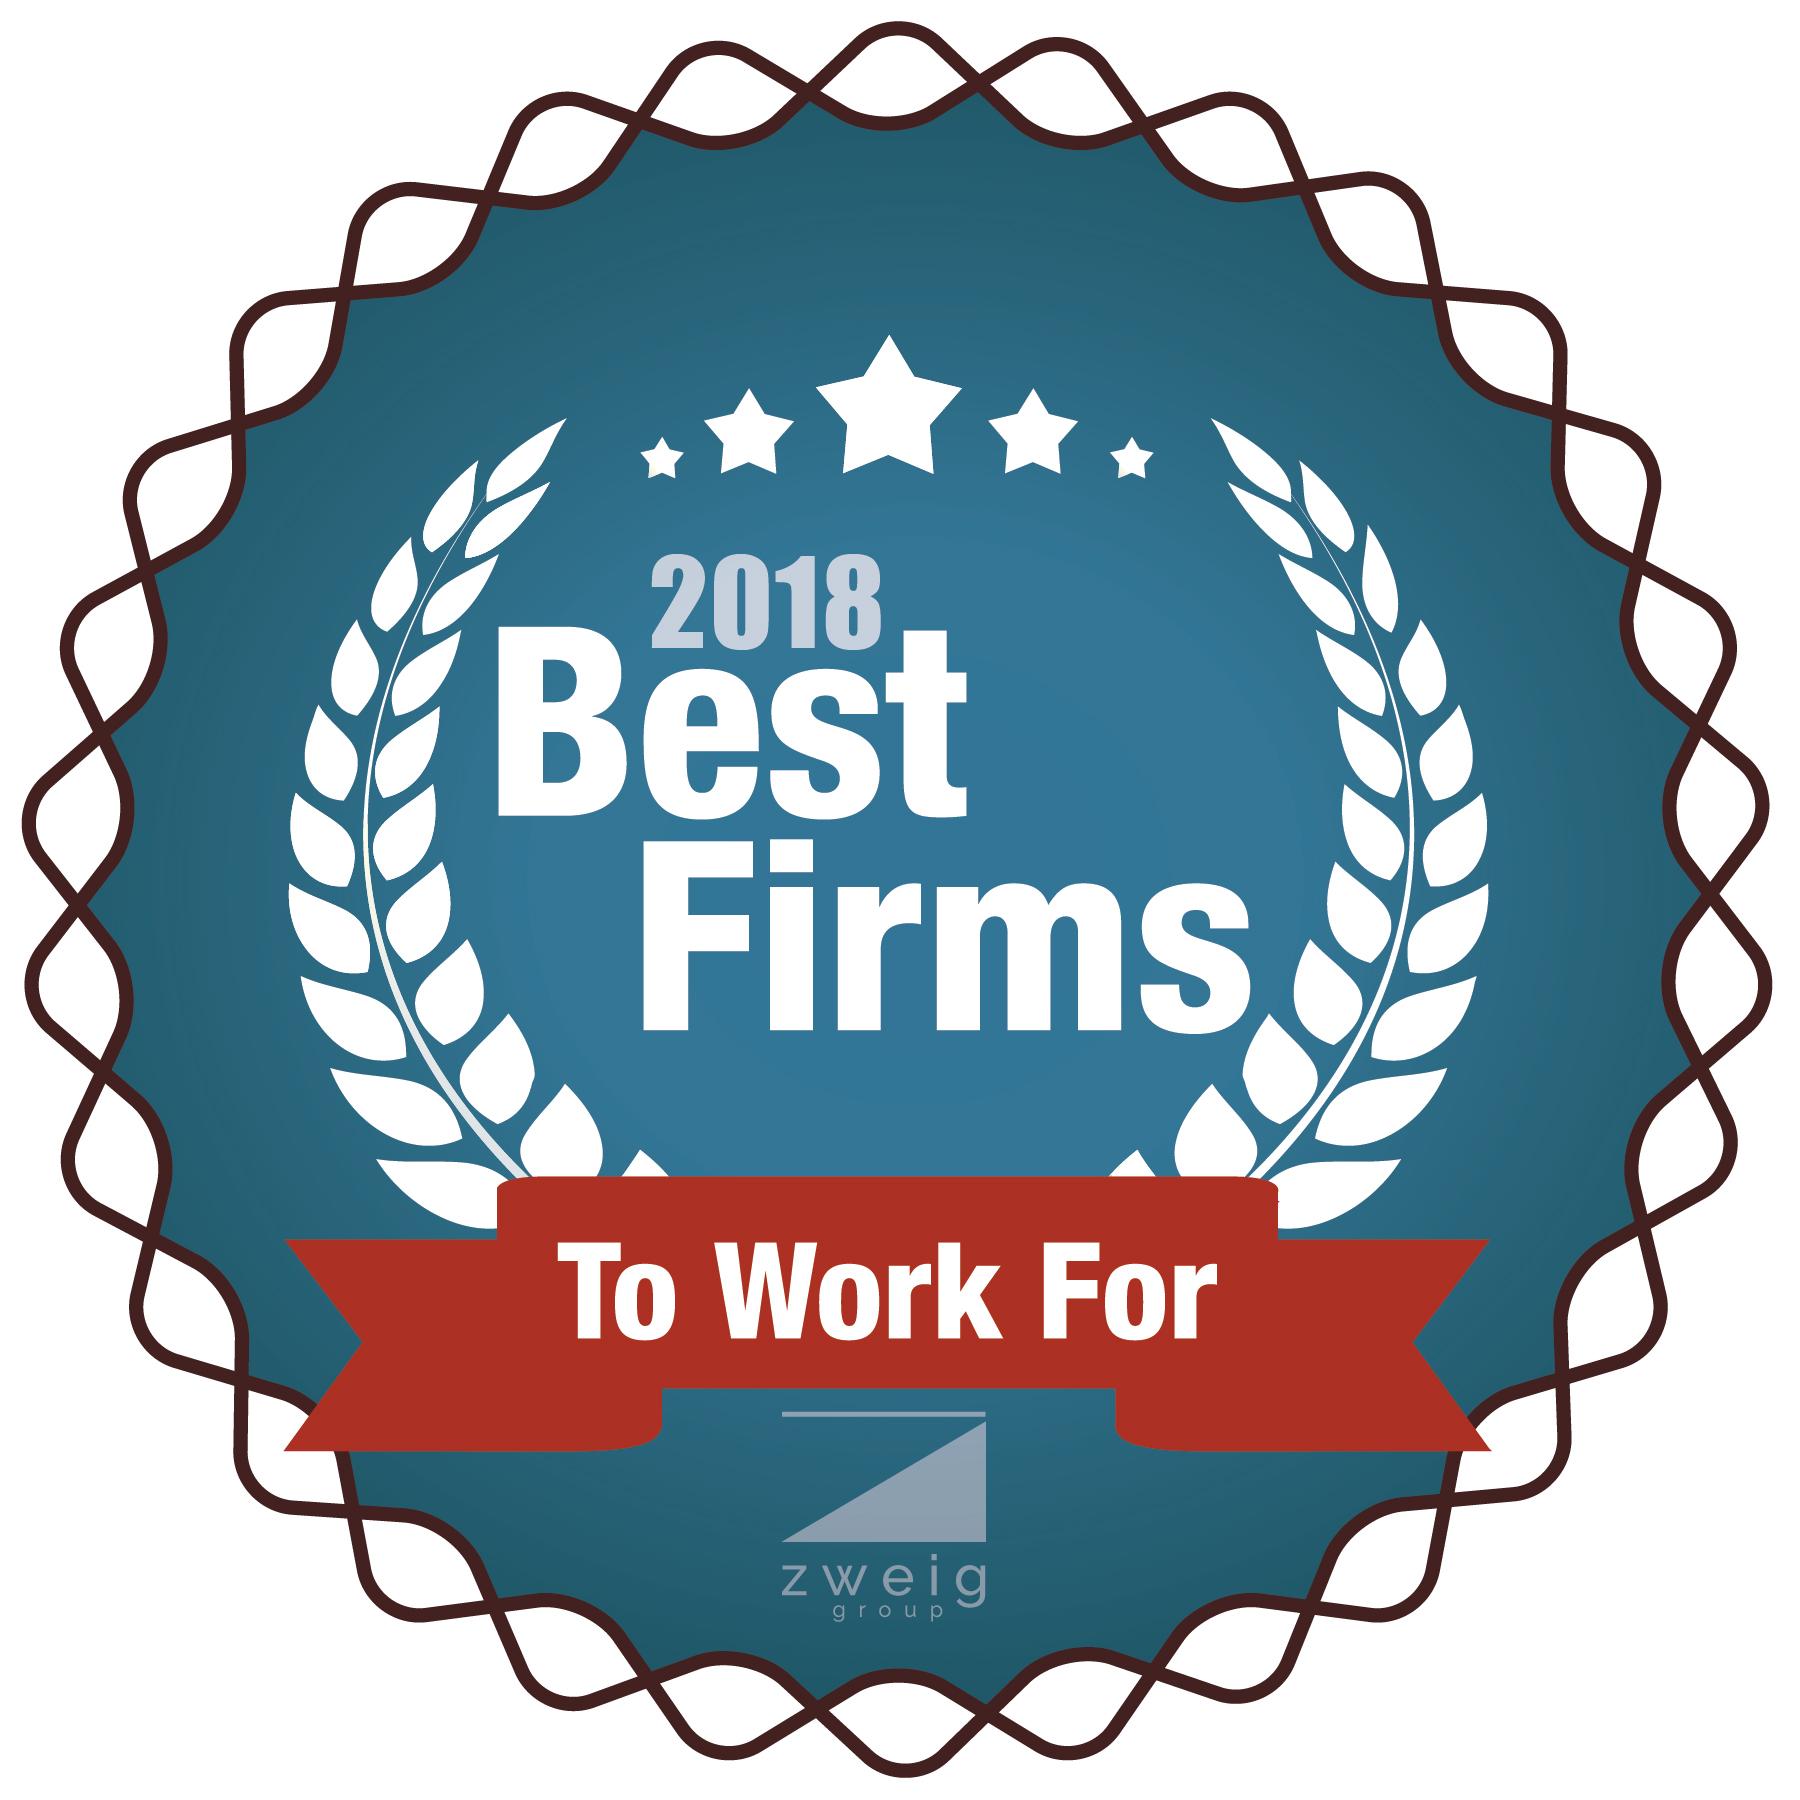 CEI Accepts 'Best Firms to Work For' Award in Dallas, TX